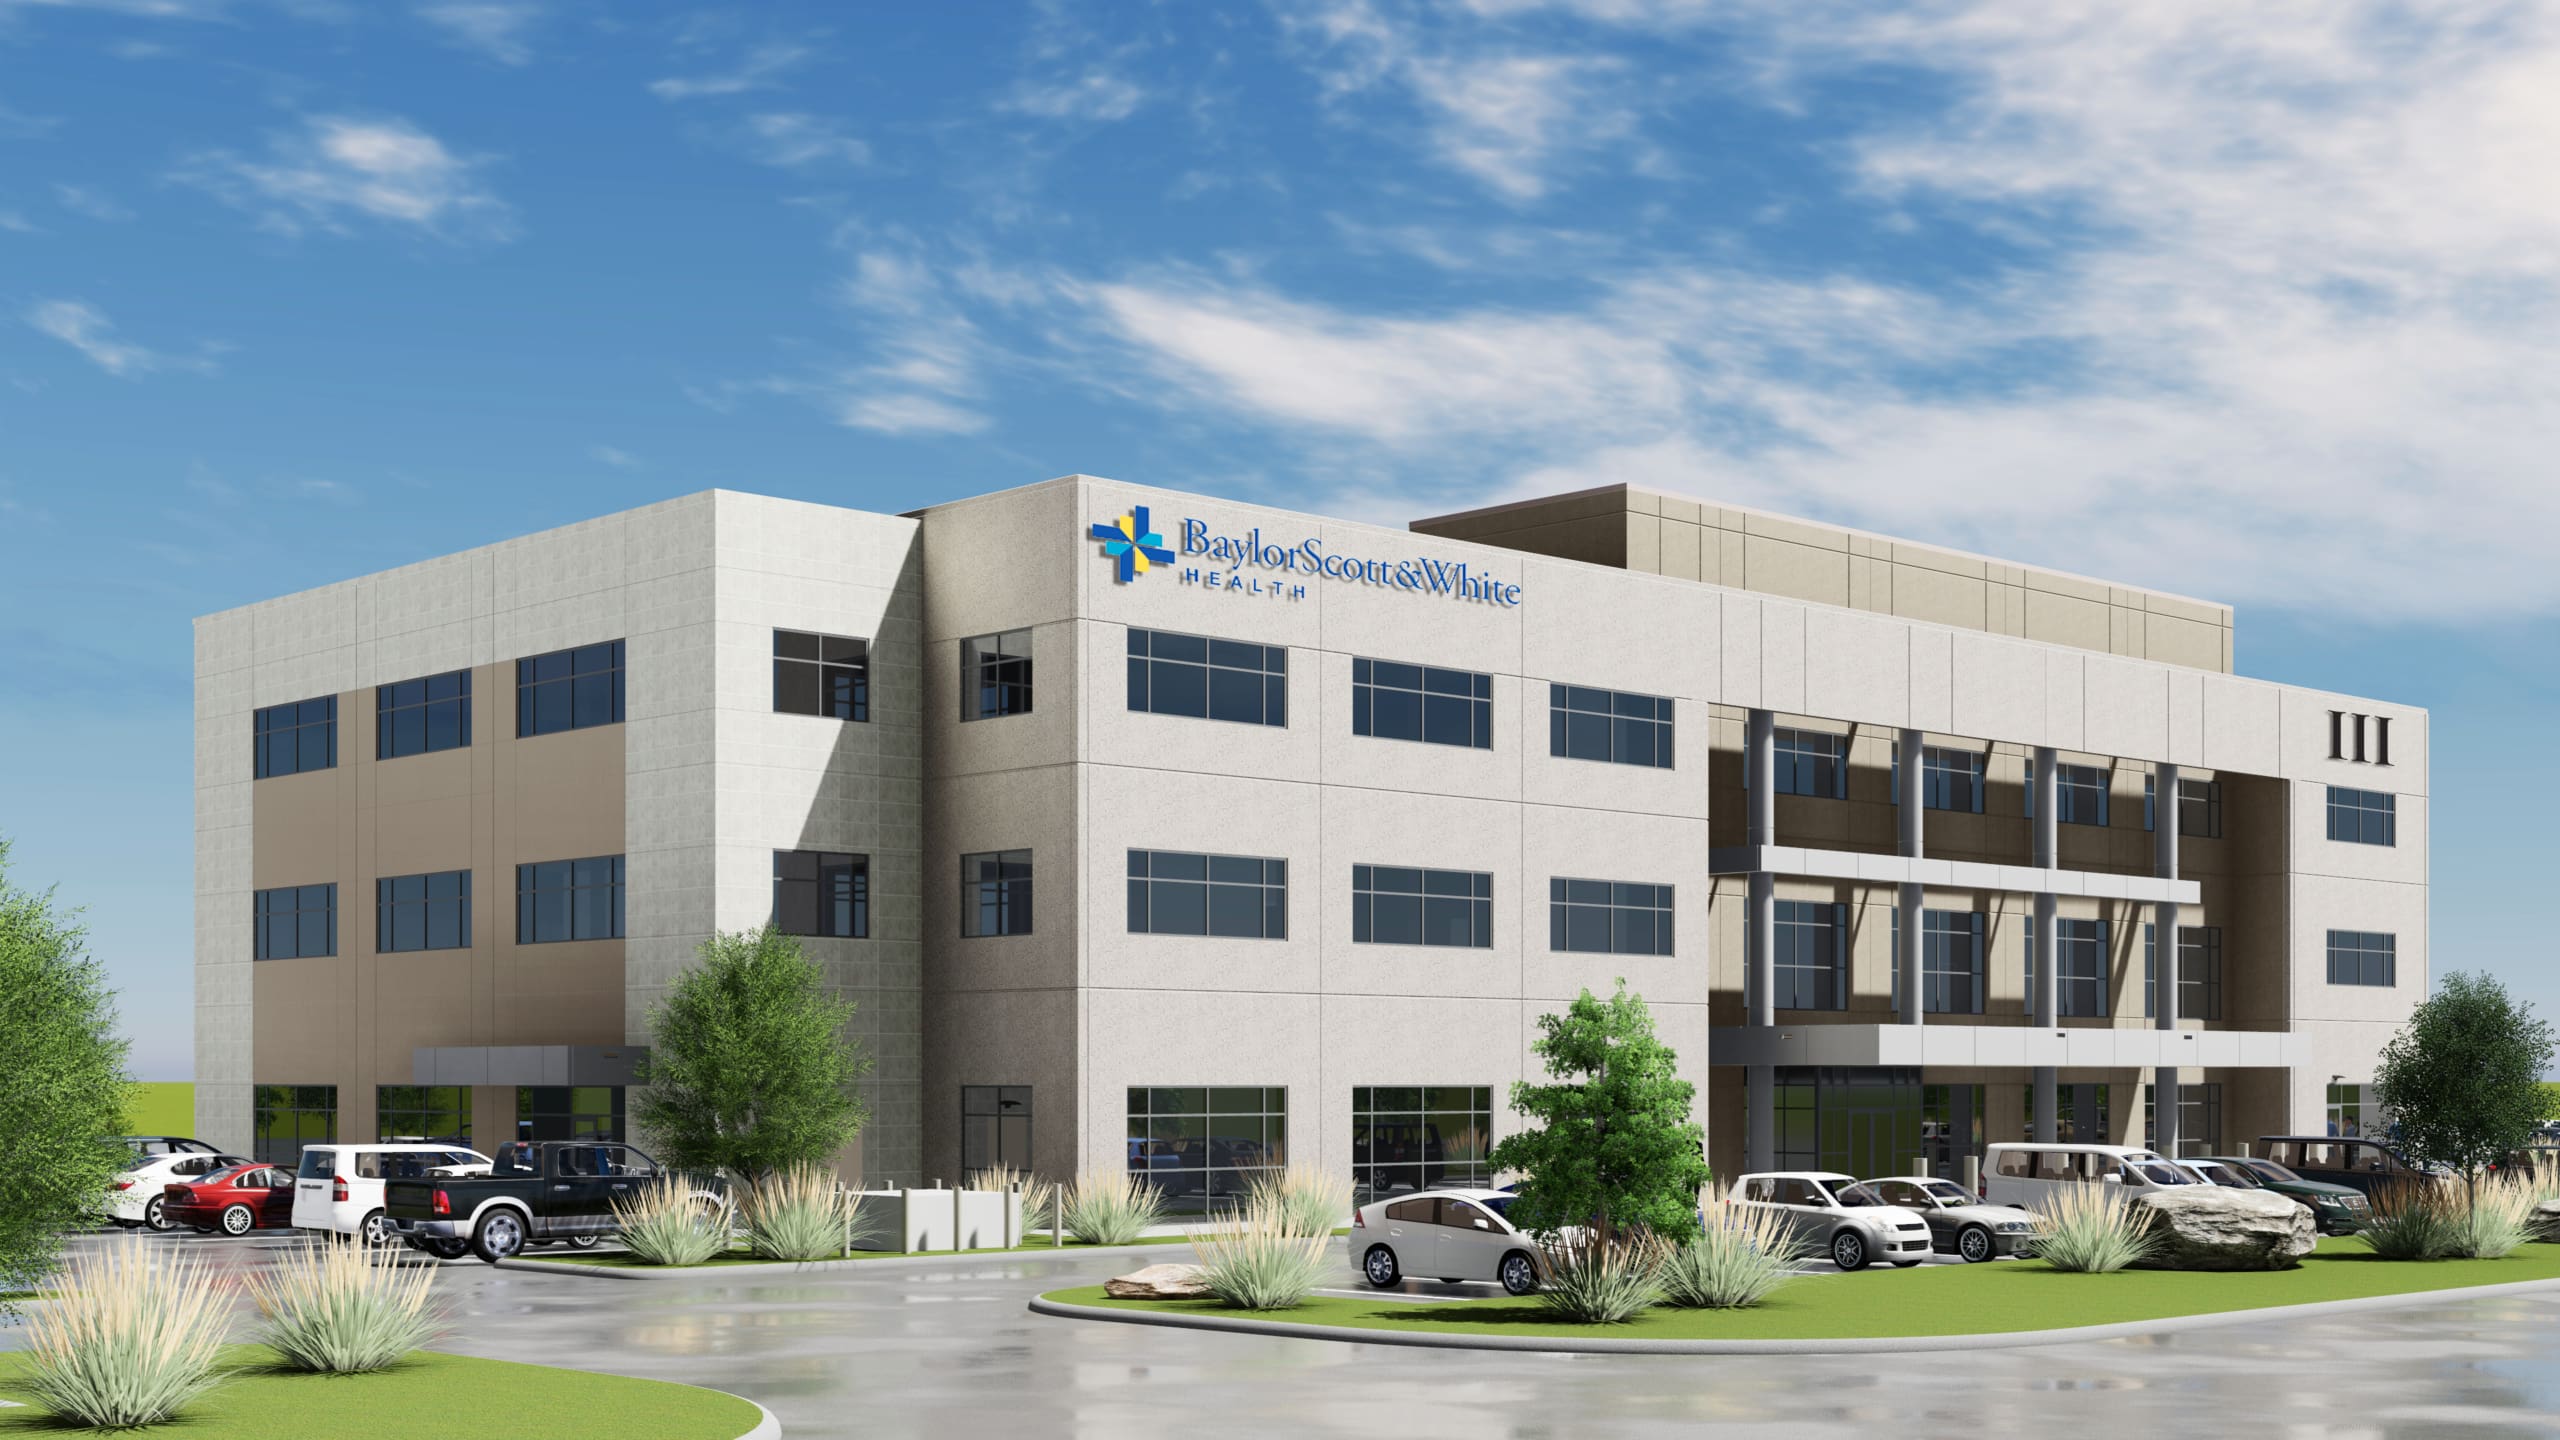 Rendering of a modern three-story baylor scott & white health clinic under a clear blue sky, with parked cars and lush greenery surrounding the building.